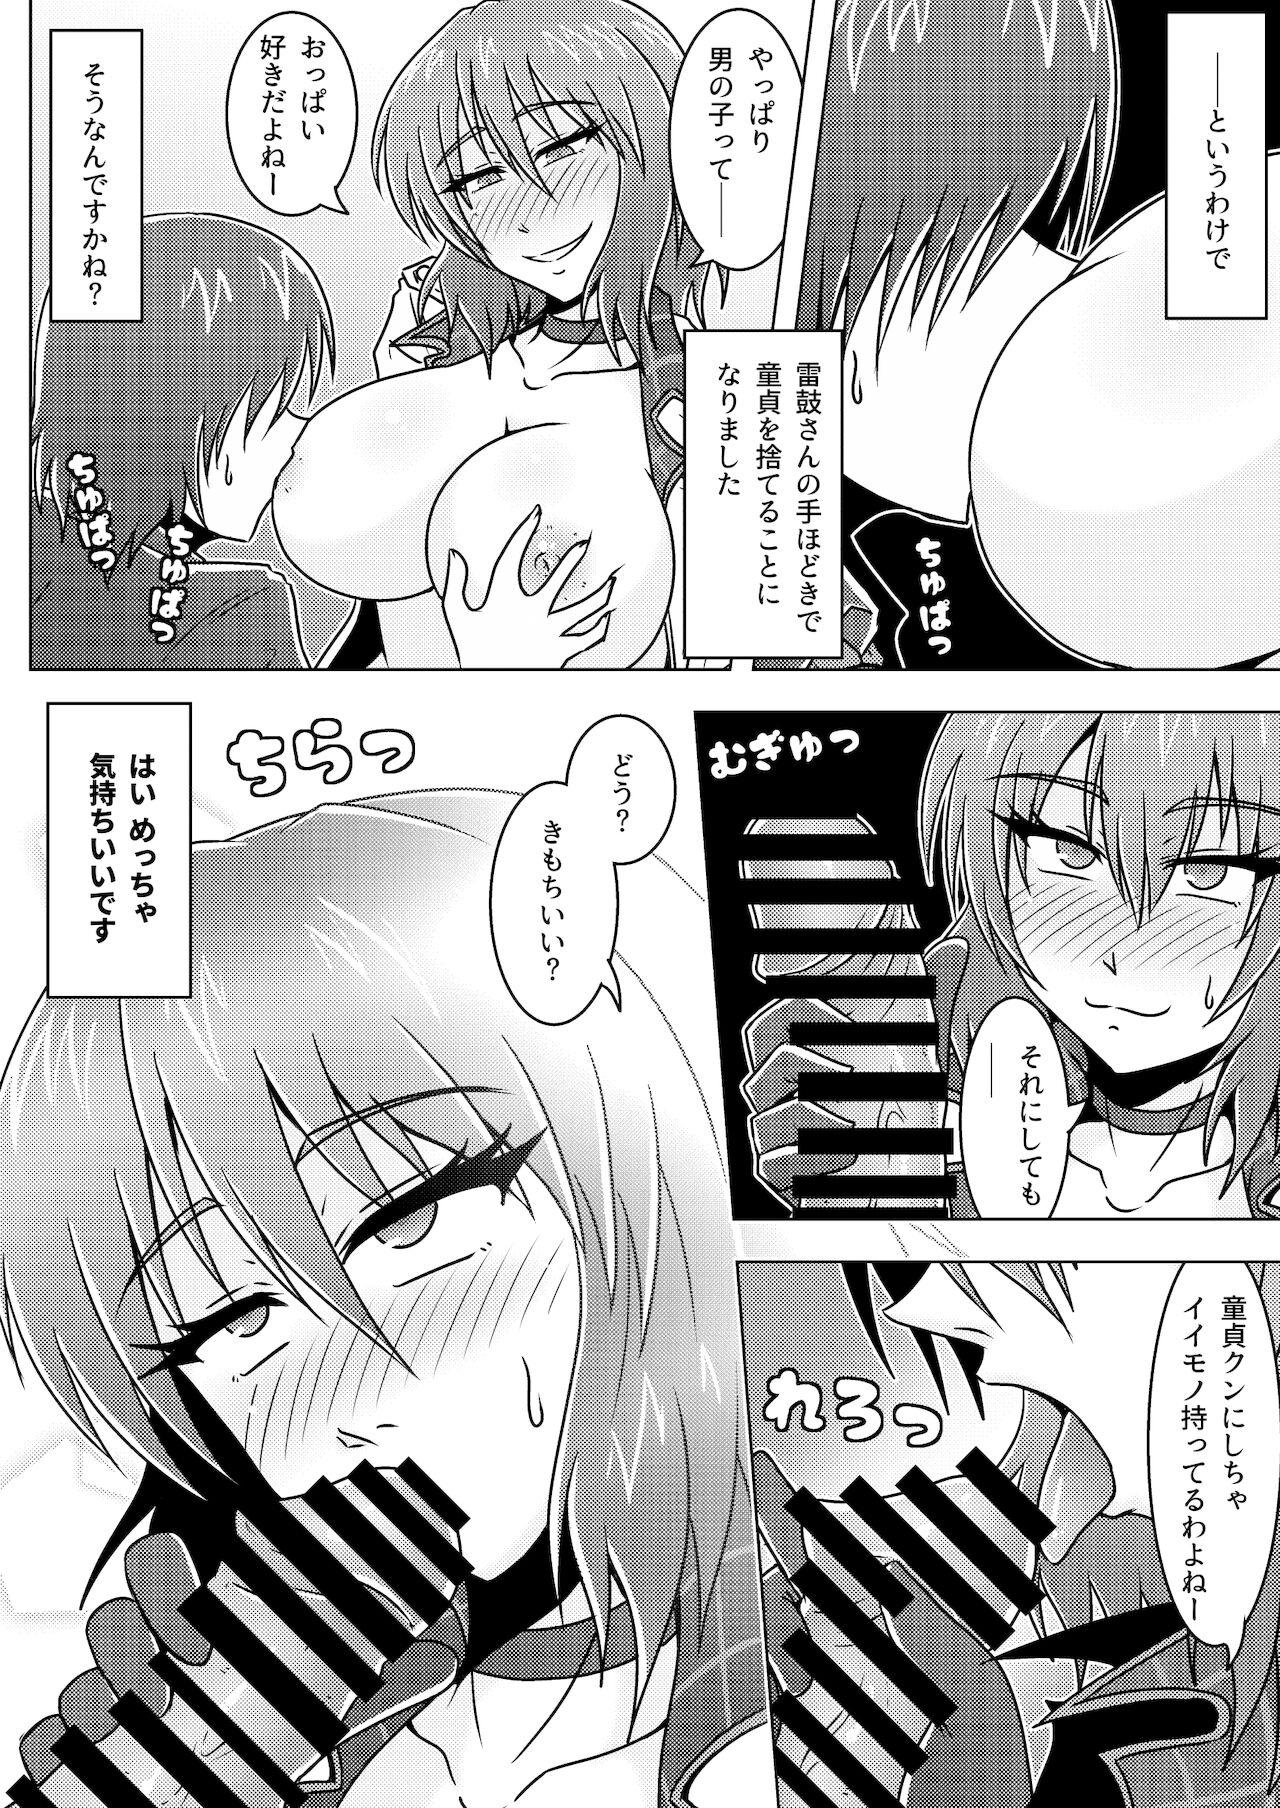 Cumload 雷鼓さんはお酒を控えない - Touhou project Oral Sex - Page 3